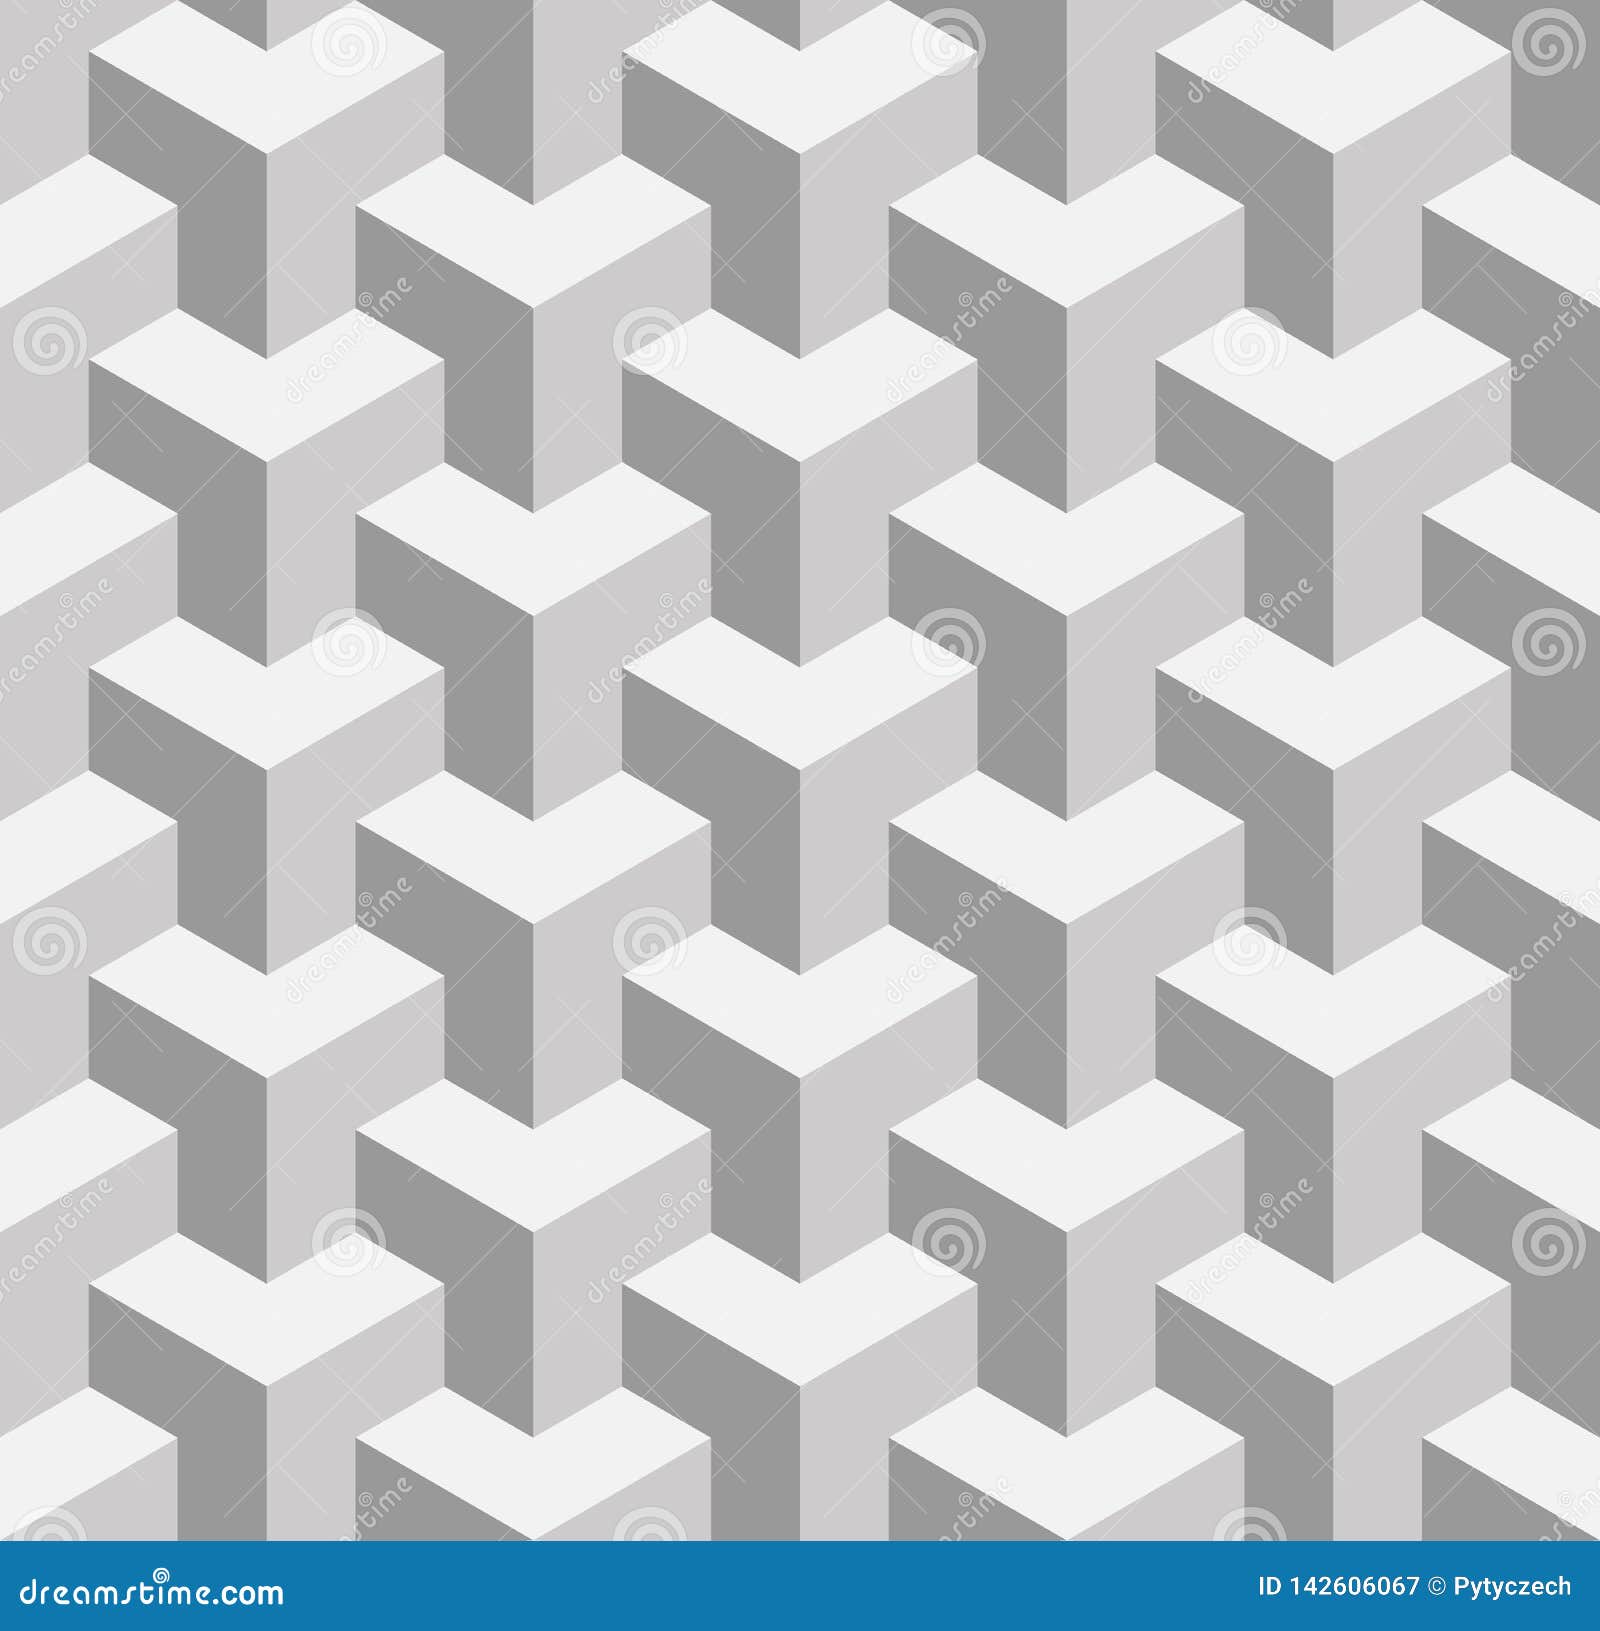 Seamless 3d Geometrical Pattern Of Overlapping Cubes Abstract Design Vector Background In